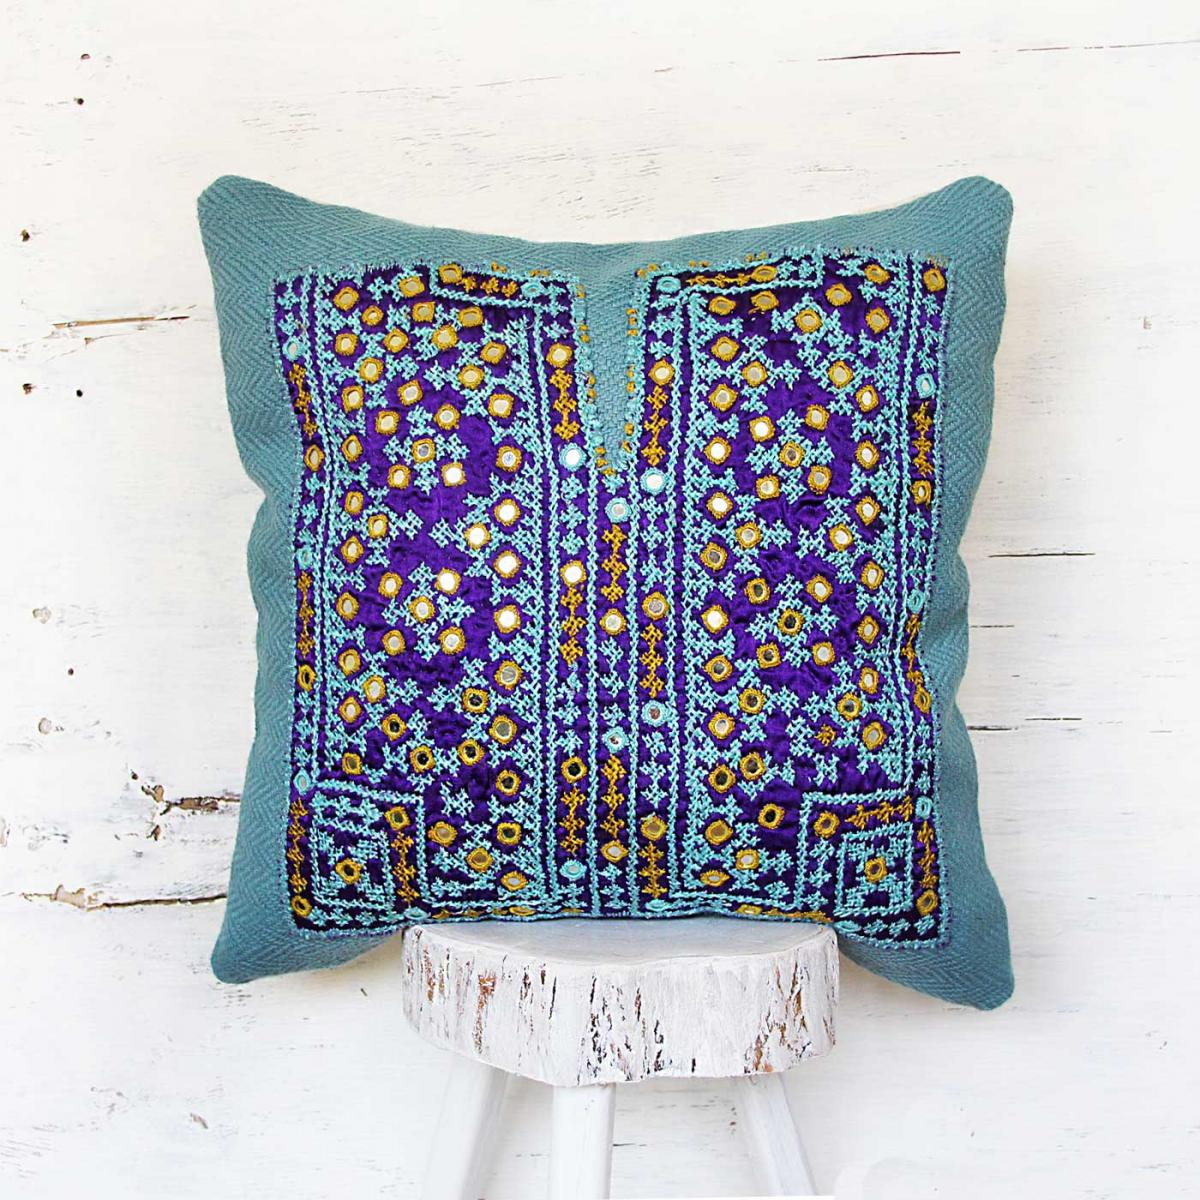 Hand Embroidery Patterns For Pillowcases Our Pillows Are Made From Traditional Baluch Handmade Needlework